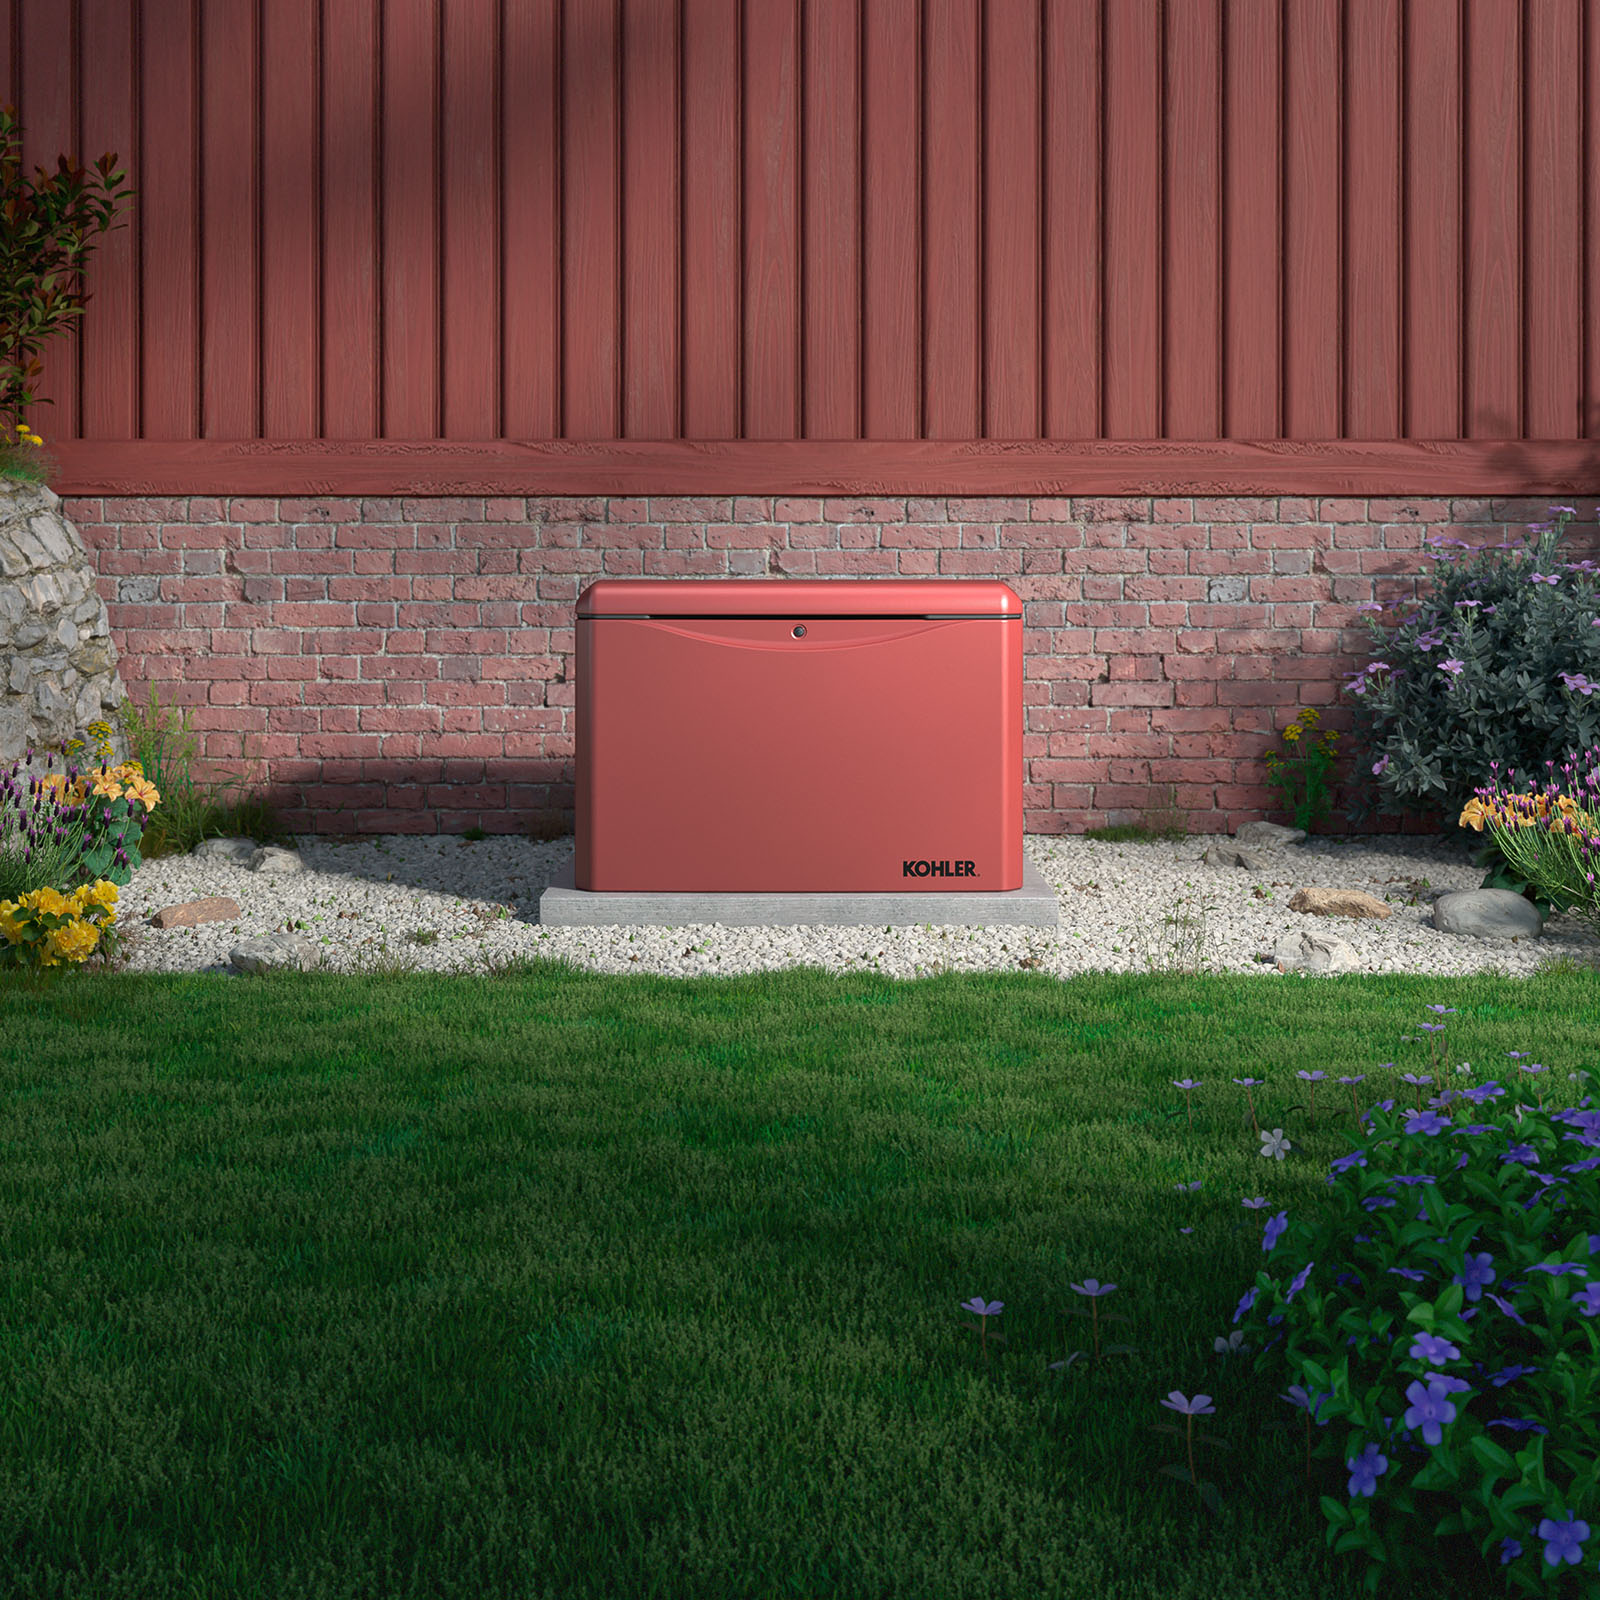 Image of a brick dust colored Kohler Home Generator sitting next to a house brick background on a cement base in a pebble area surrounded by a green lawn with bushes and flowers